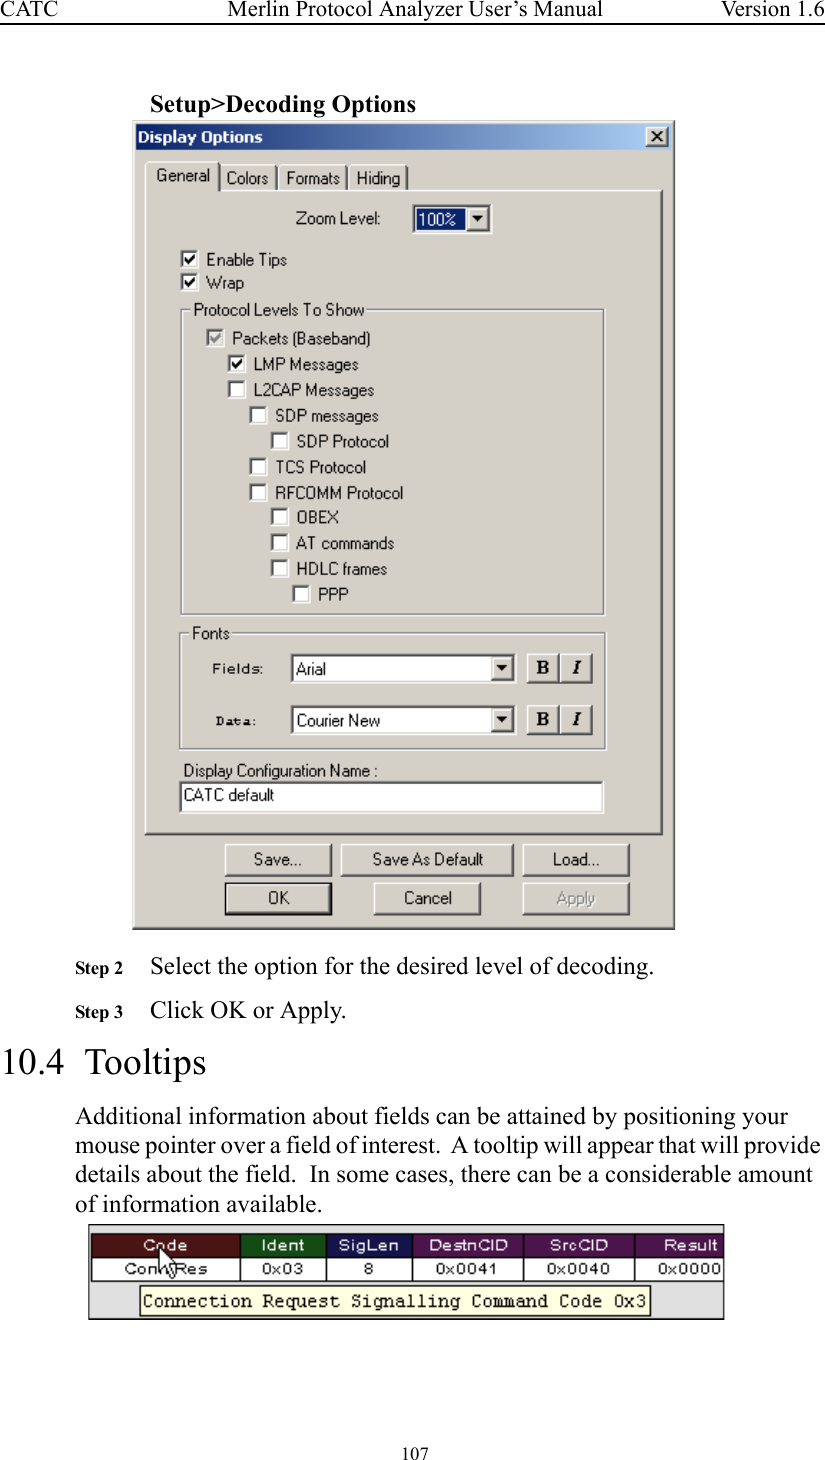  107 Merlin Protocol Analyzer User’s ManualCATC Version 1.6Setup&gt;Decoding OptionsStep 2 Select the option for the desired level of decoding. Step 3 Click OK or Apply.10.4  TooltipsAdditional information about fields can be attained by positioning your mouse pointer over a field of interest.  A tooltip will appear that will provide details about the field.  In some cases, there can be a considerable amount of information available.